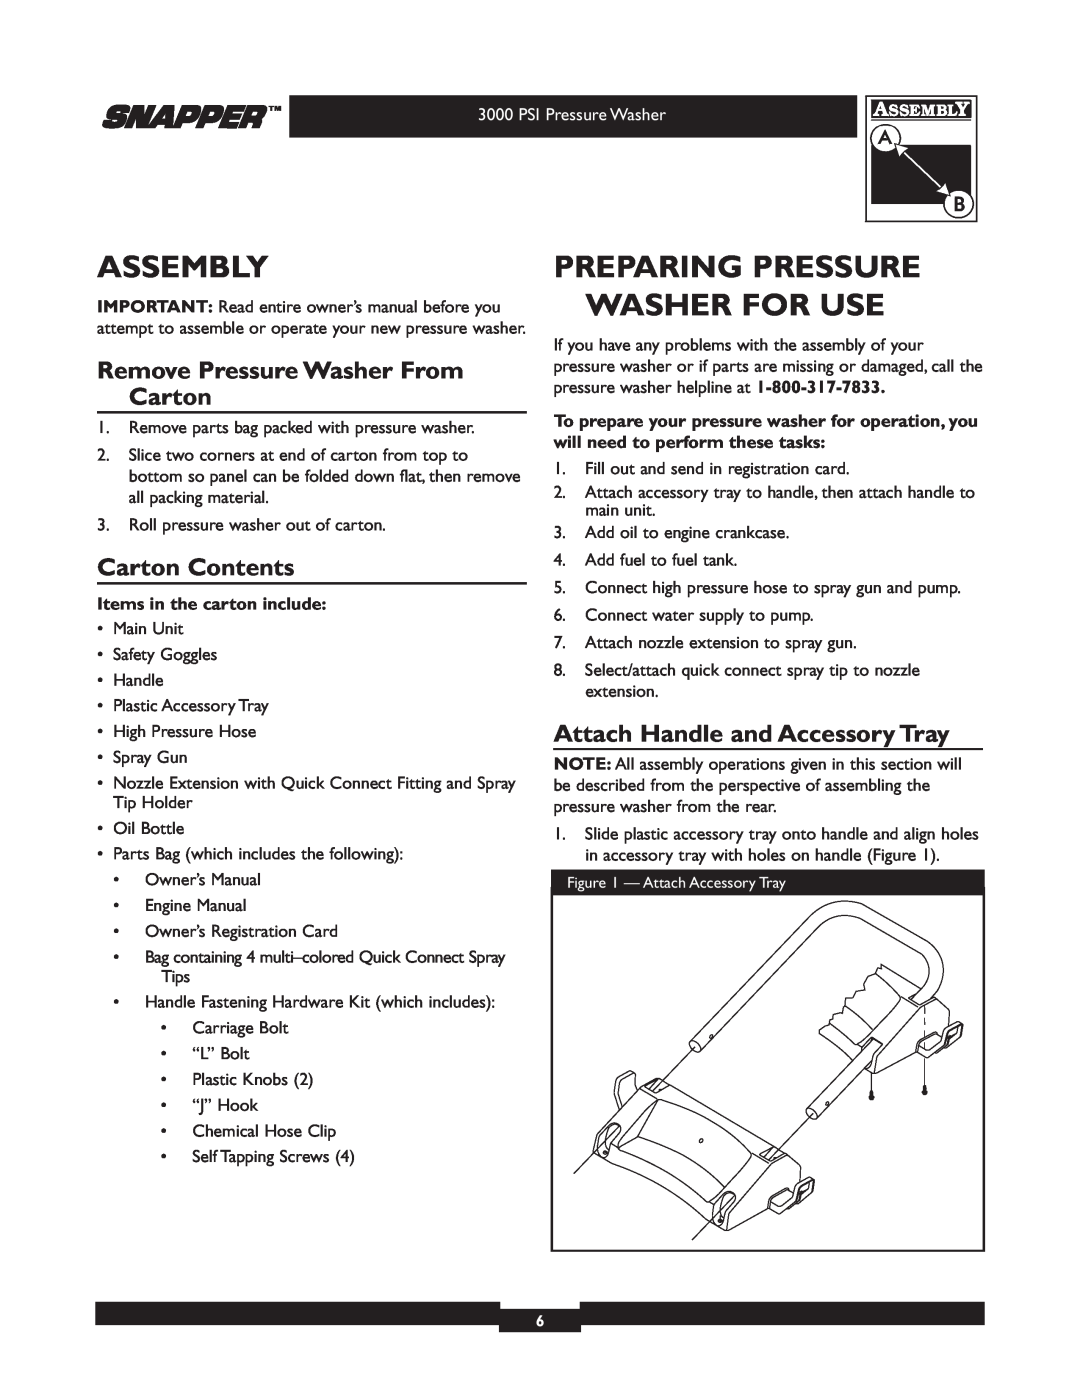 Snapper 020231 Assembly, Preparing Pressure Washer For Use, Remove Pressure Washer From Carton, Carton Contents 